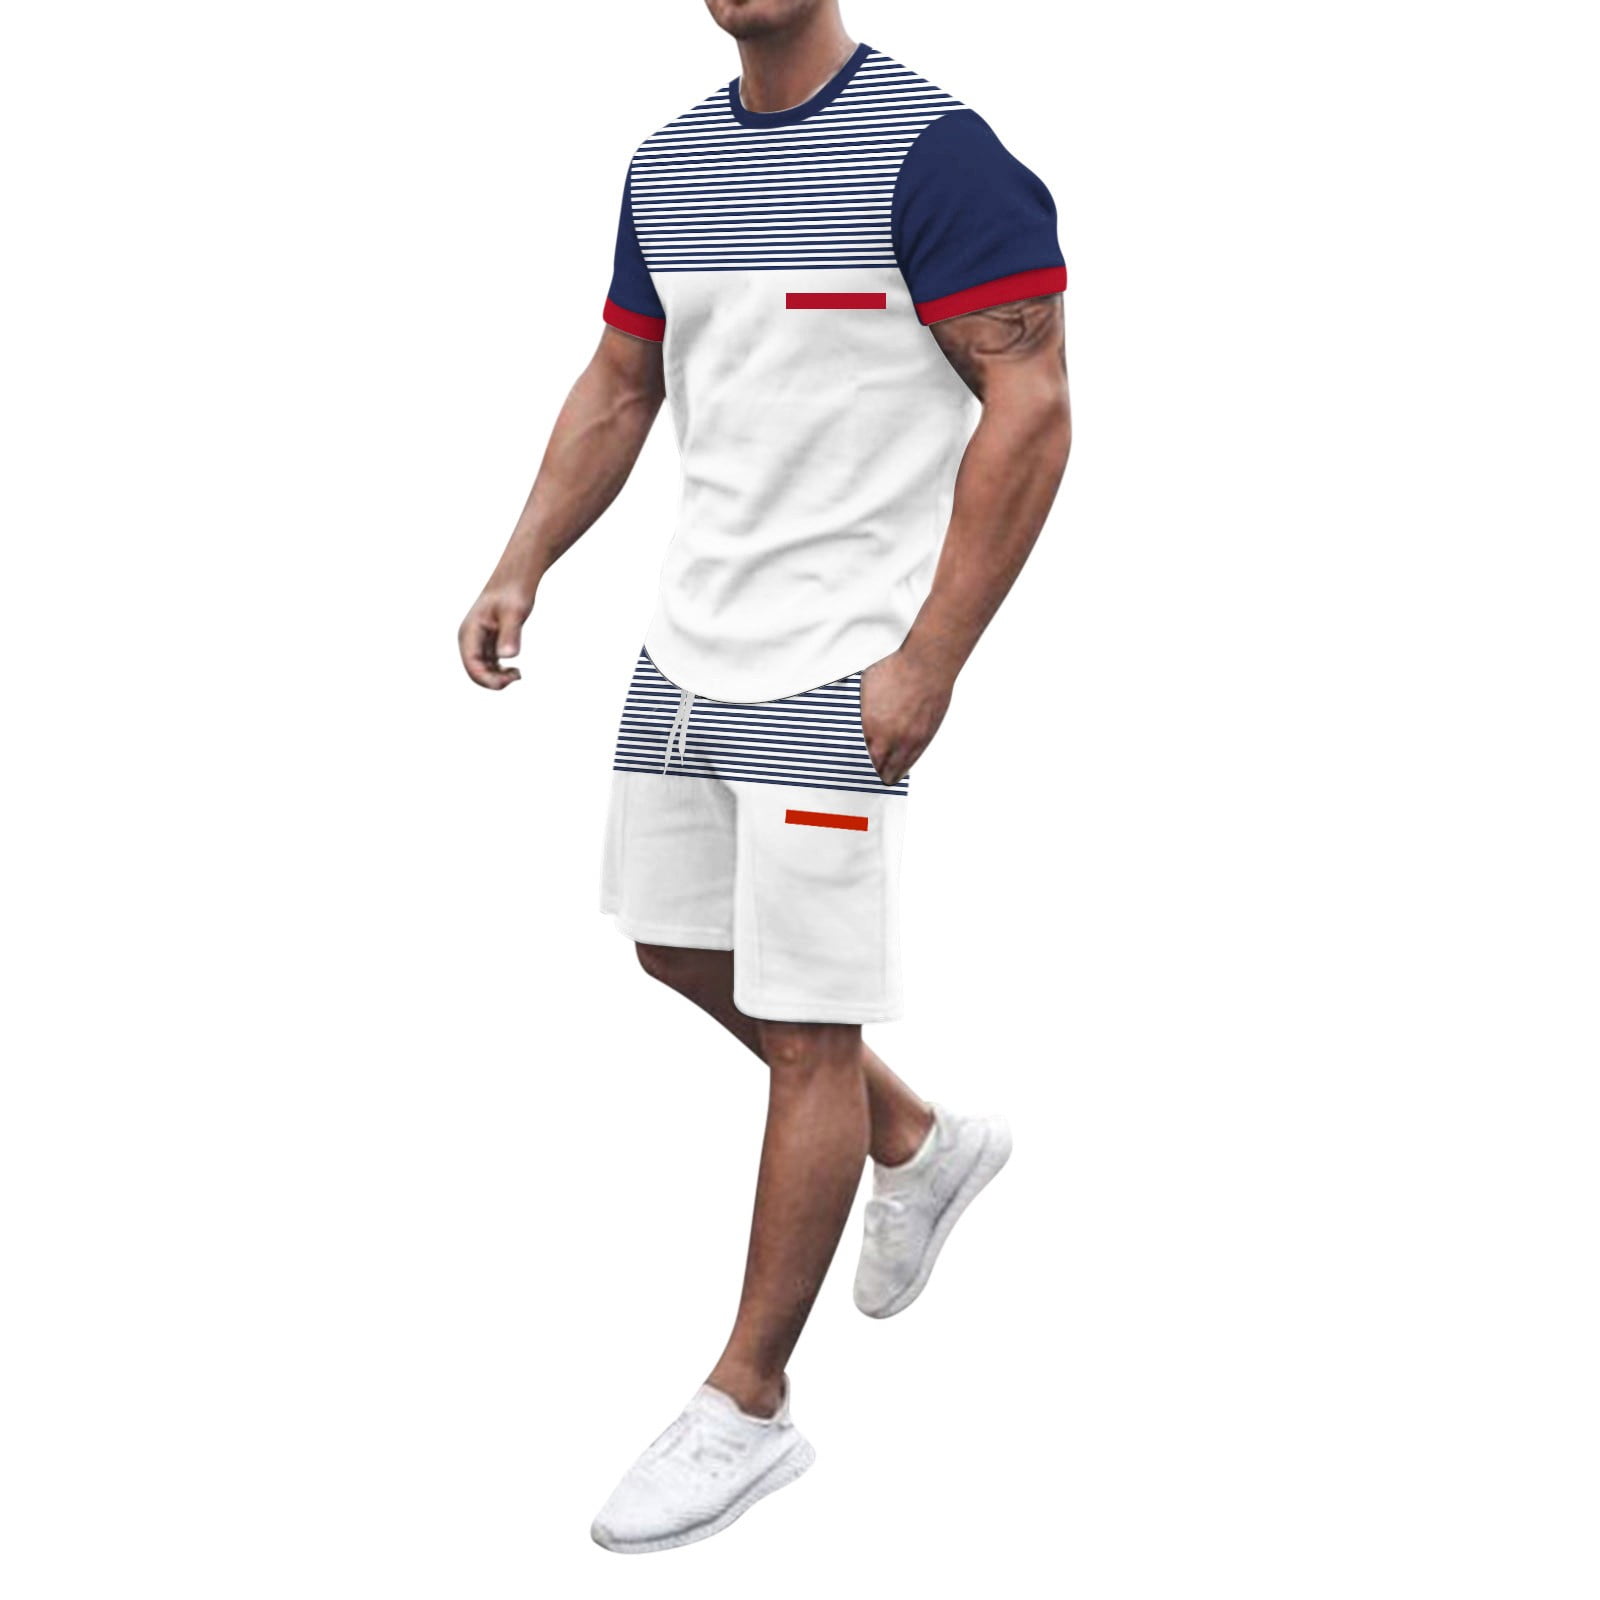 Ketyyh-chn99 Gym Outfits for Men Set Men's 2 Pieces Tracksuit Casual ...